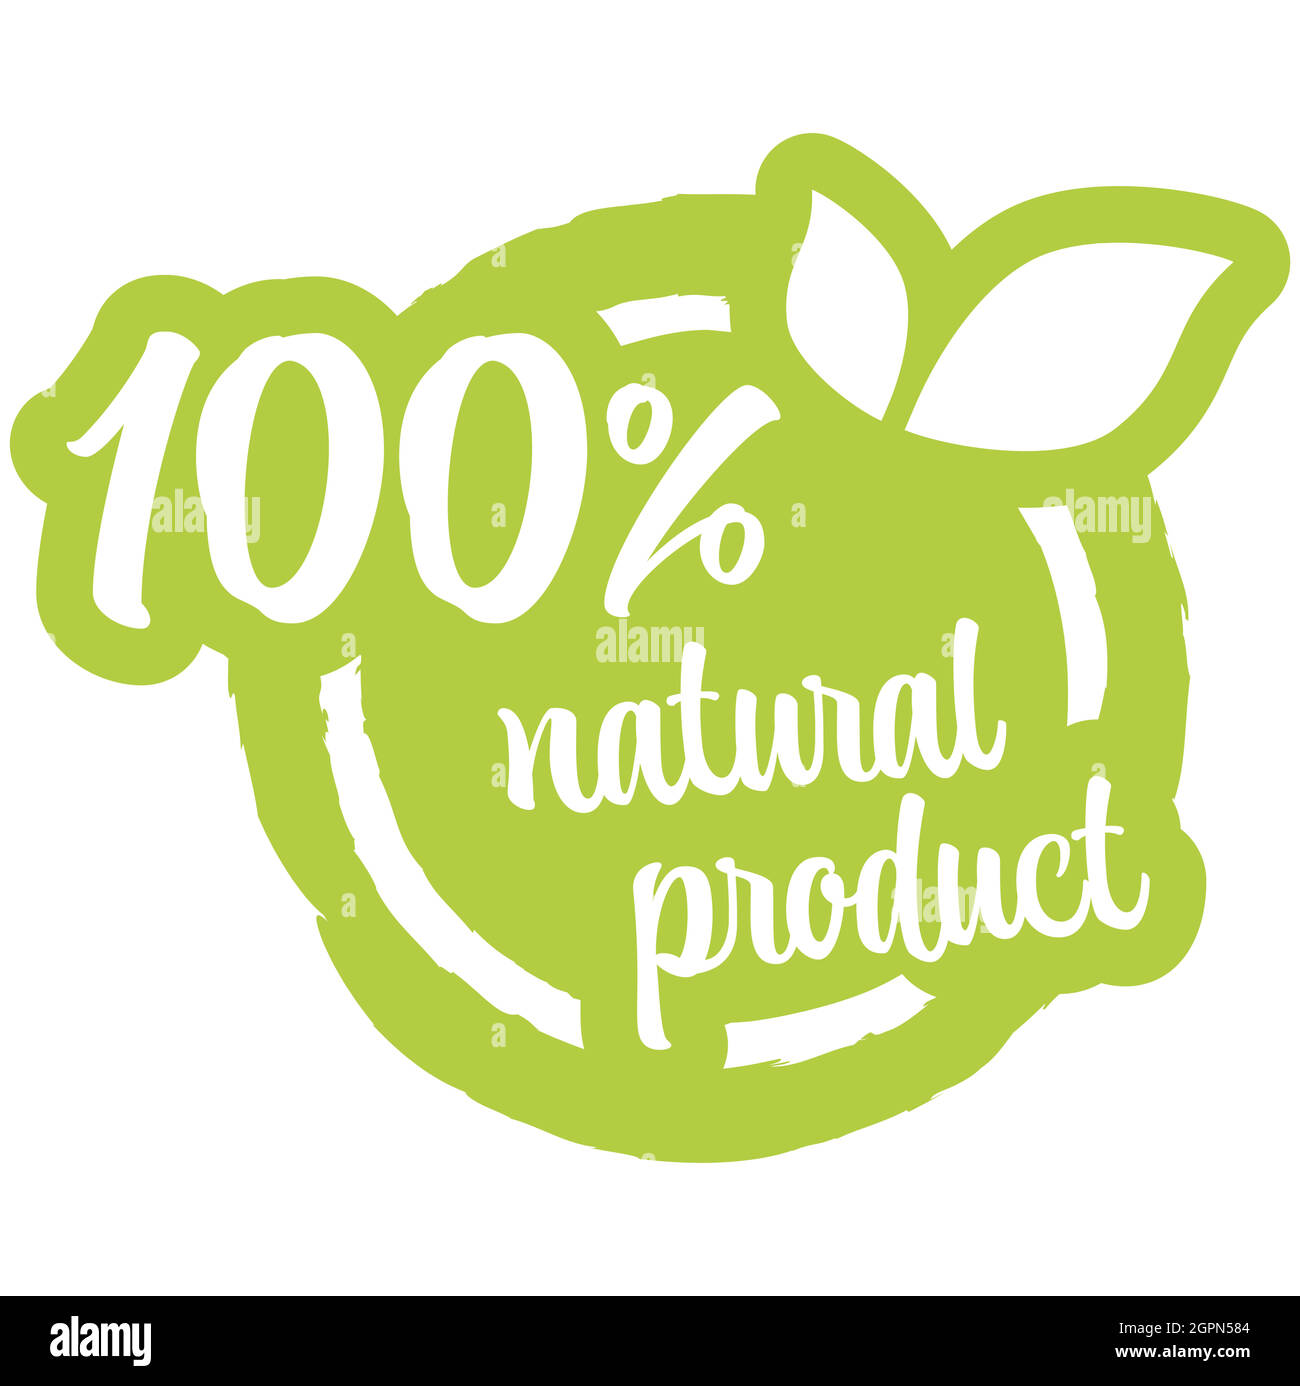 modern green stamp 100% natural product Stock Vector